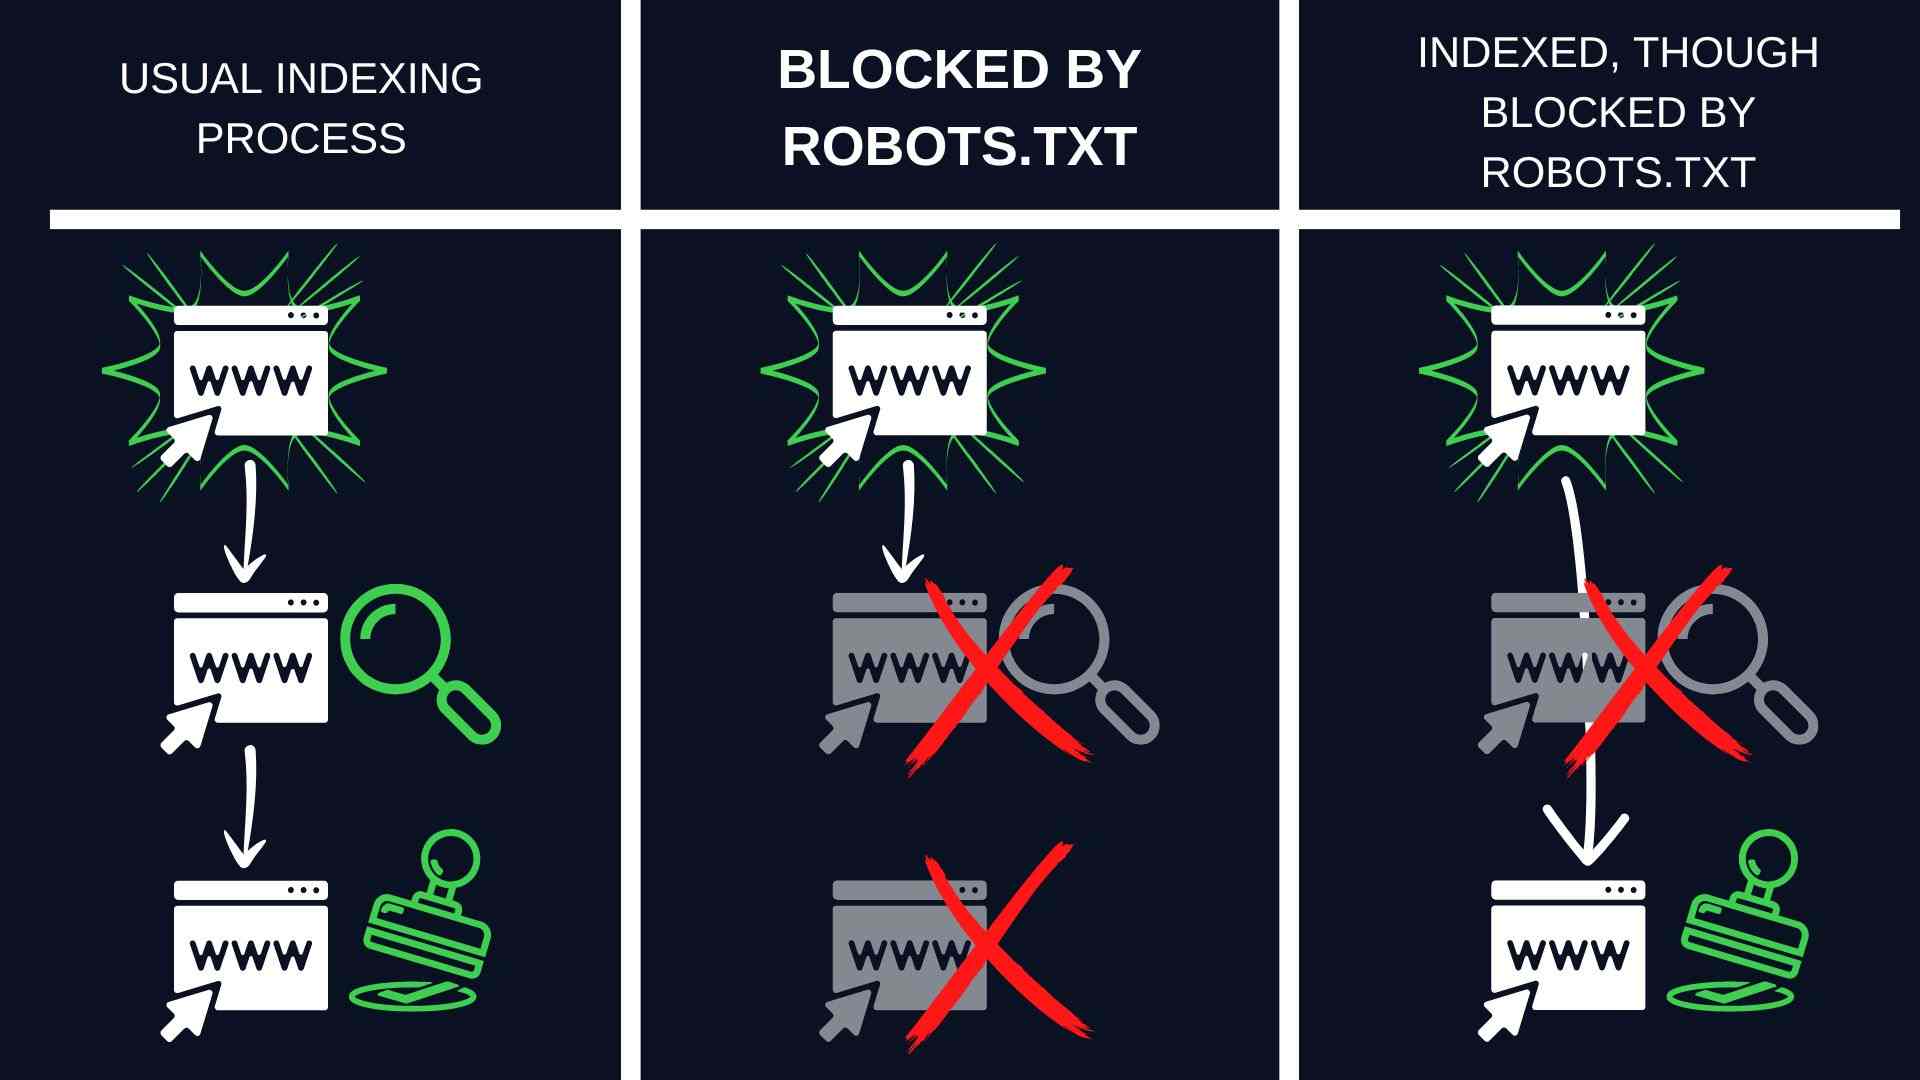 A table showing the difference between Indexed, though blocked by robots.txt, and the other status.